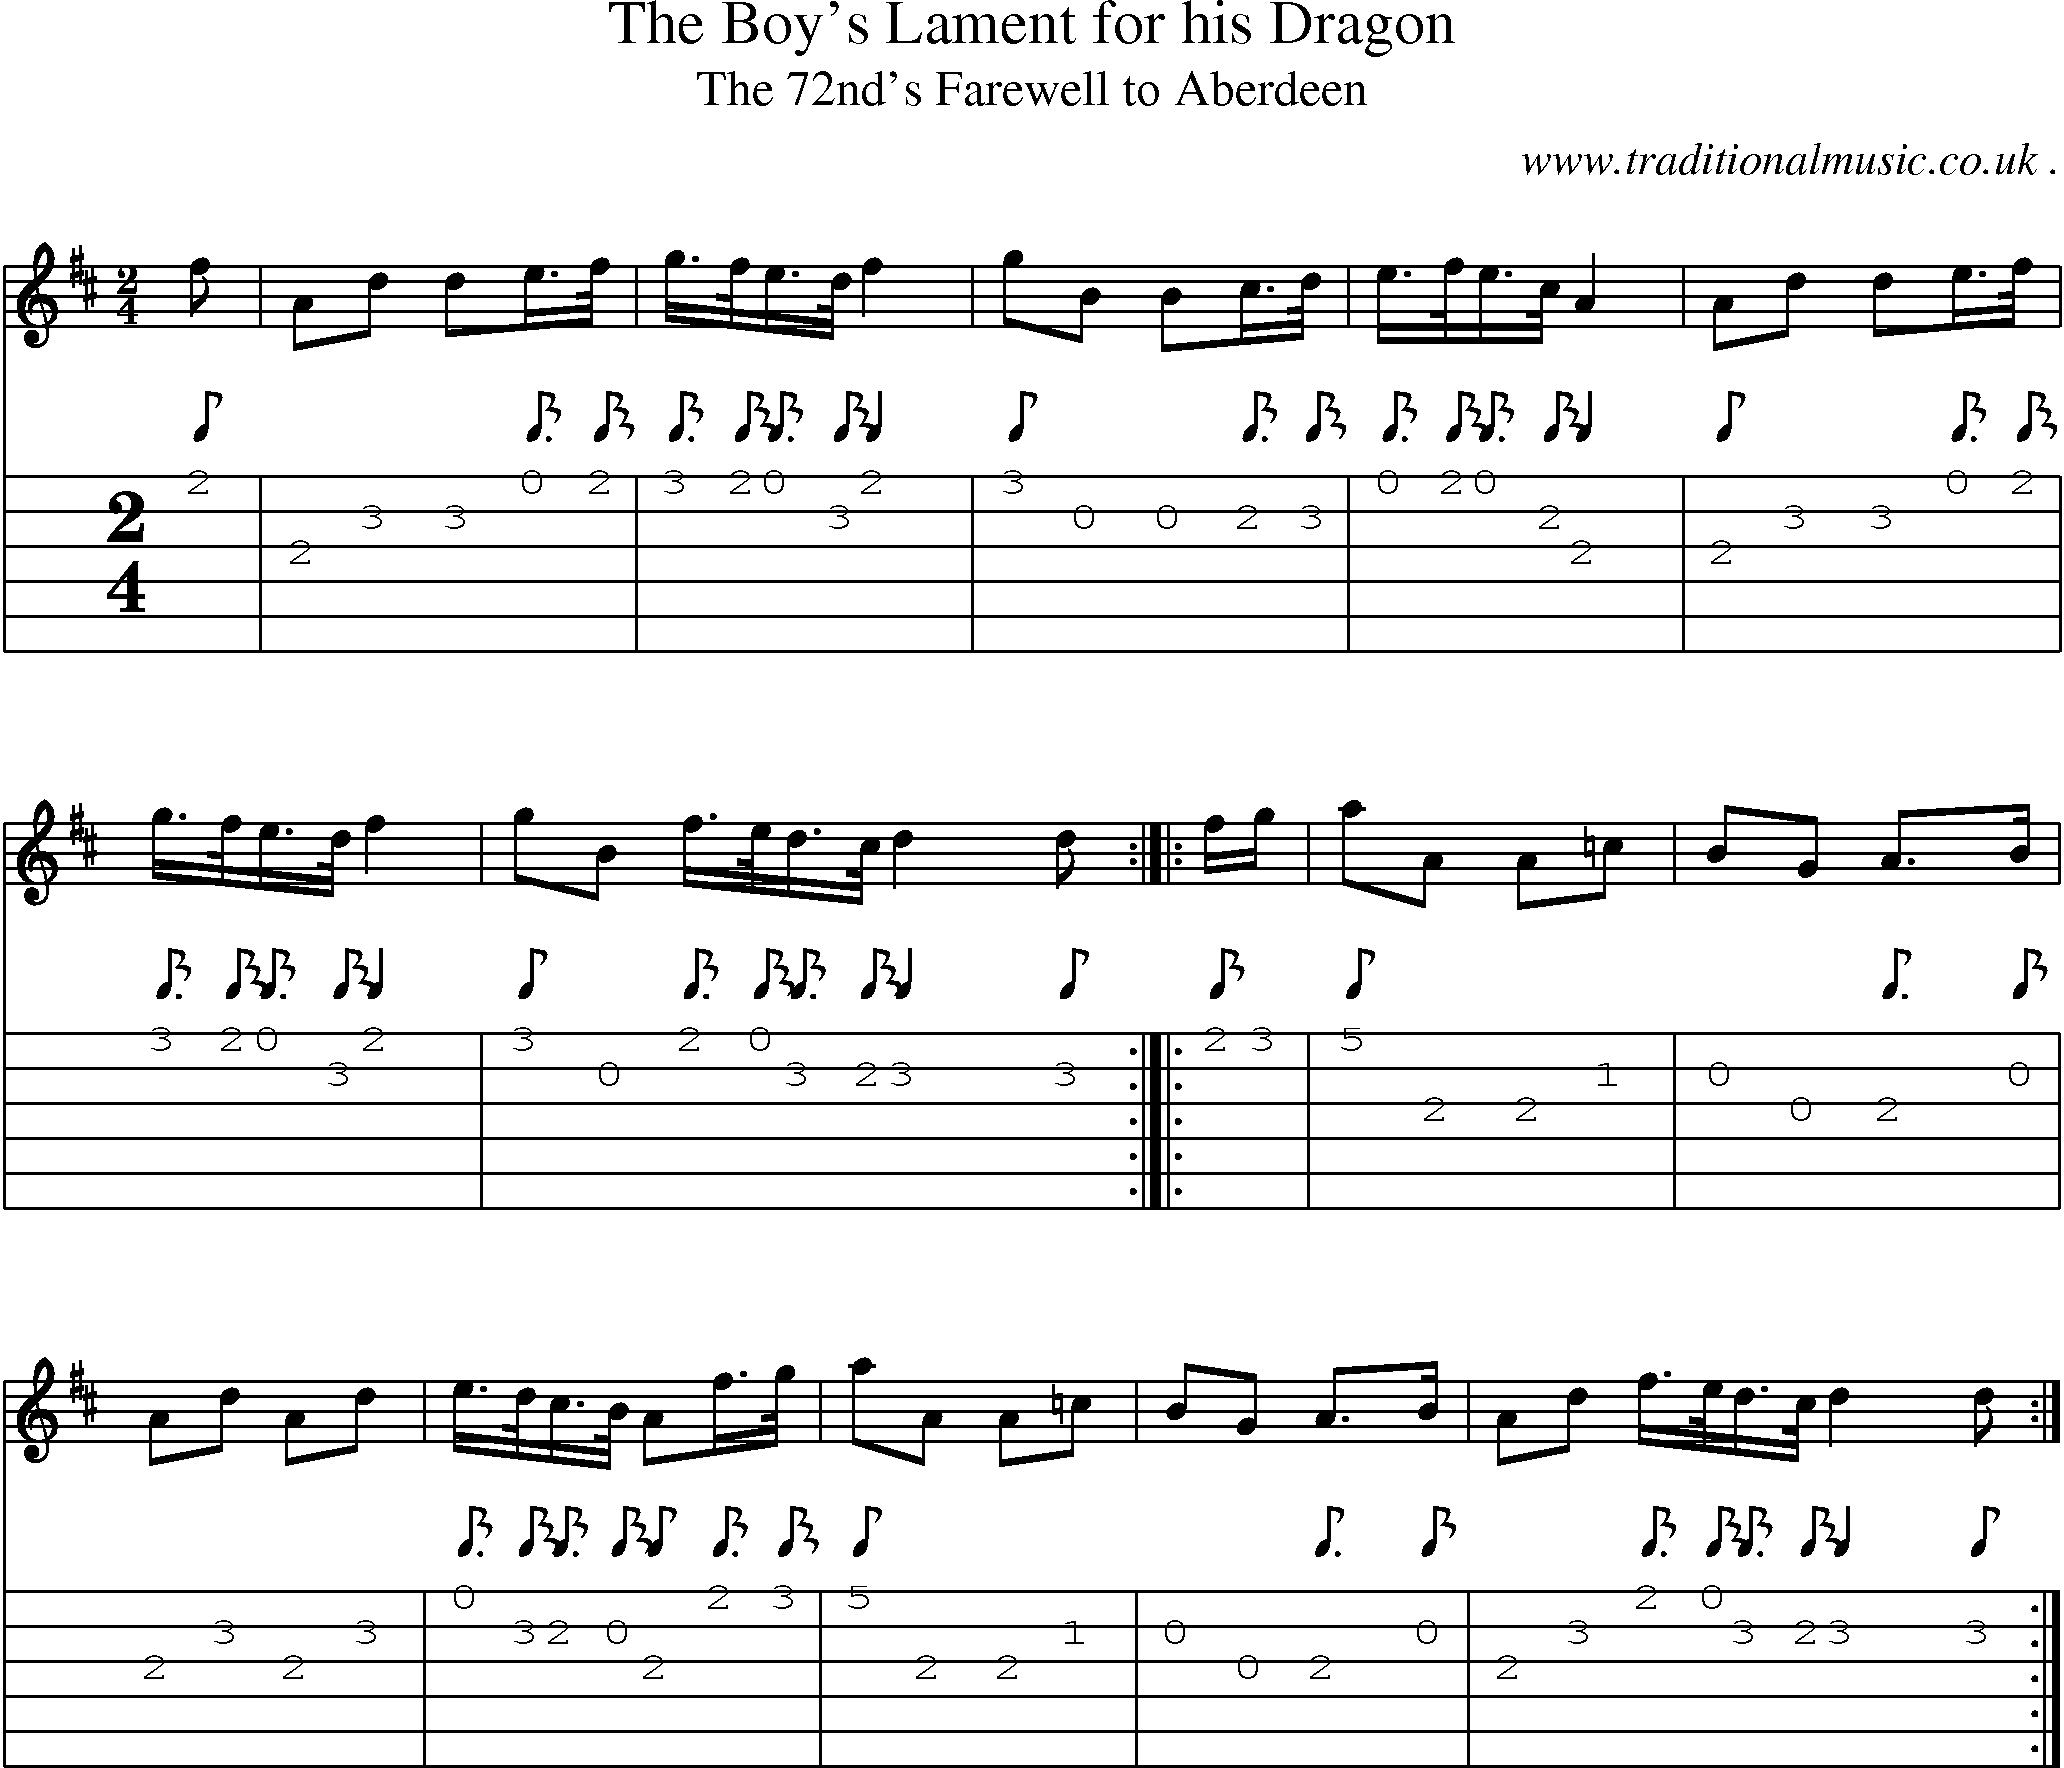 Sheet-music  score, Chords and Guitar Tabs for The Boys Lament For His Dragon